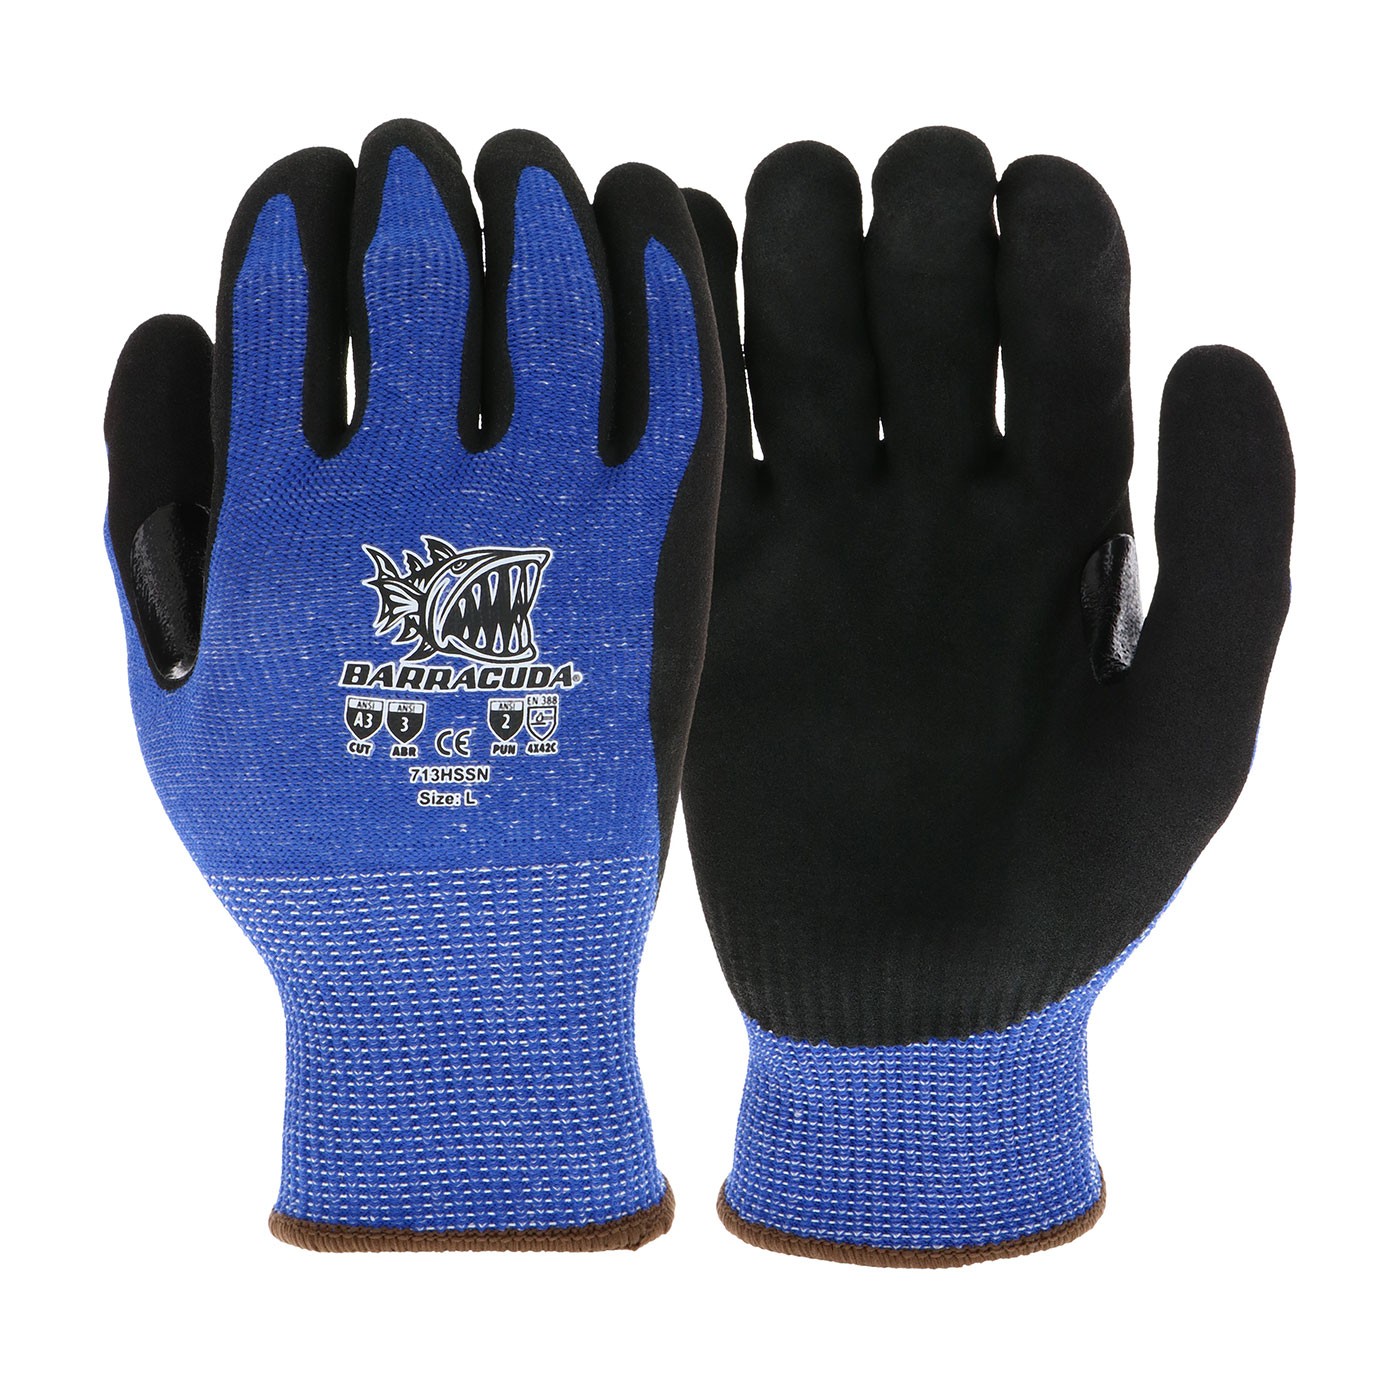 Barracuda® Seamless Knit HPPE Blended Glove with Nitrile Coated Sandy Grip on Palm & Fingers - Touchscreen Compatible  (#713HSSN)